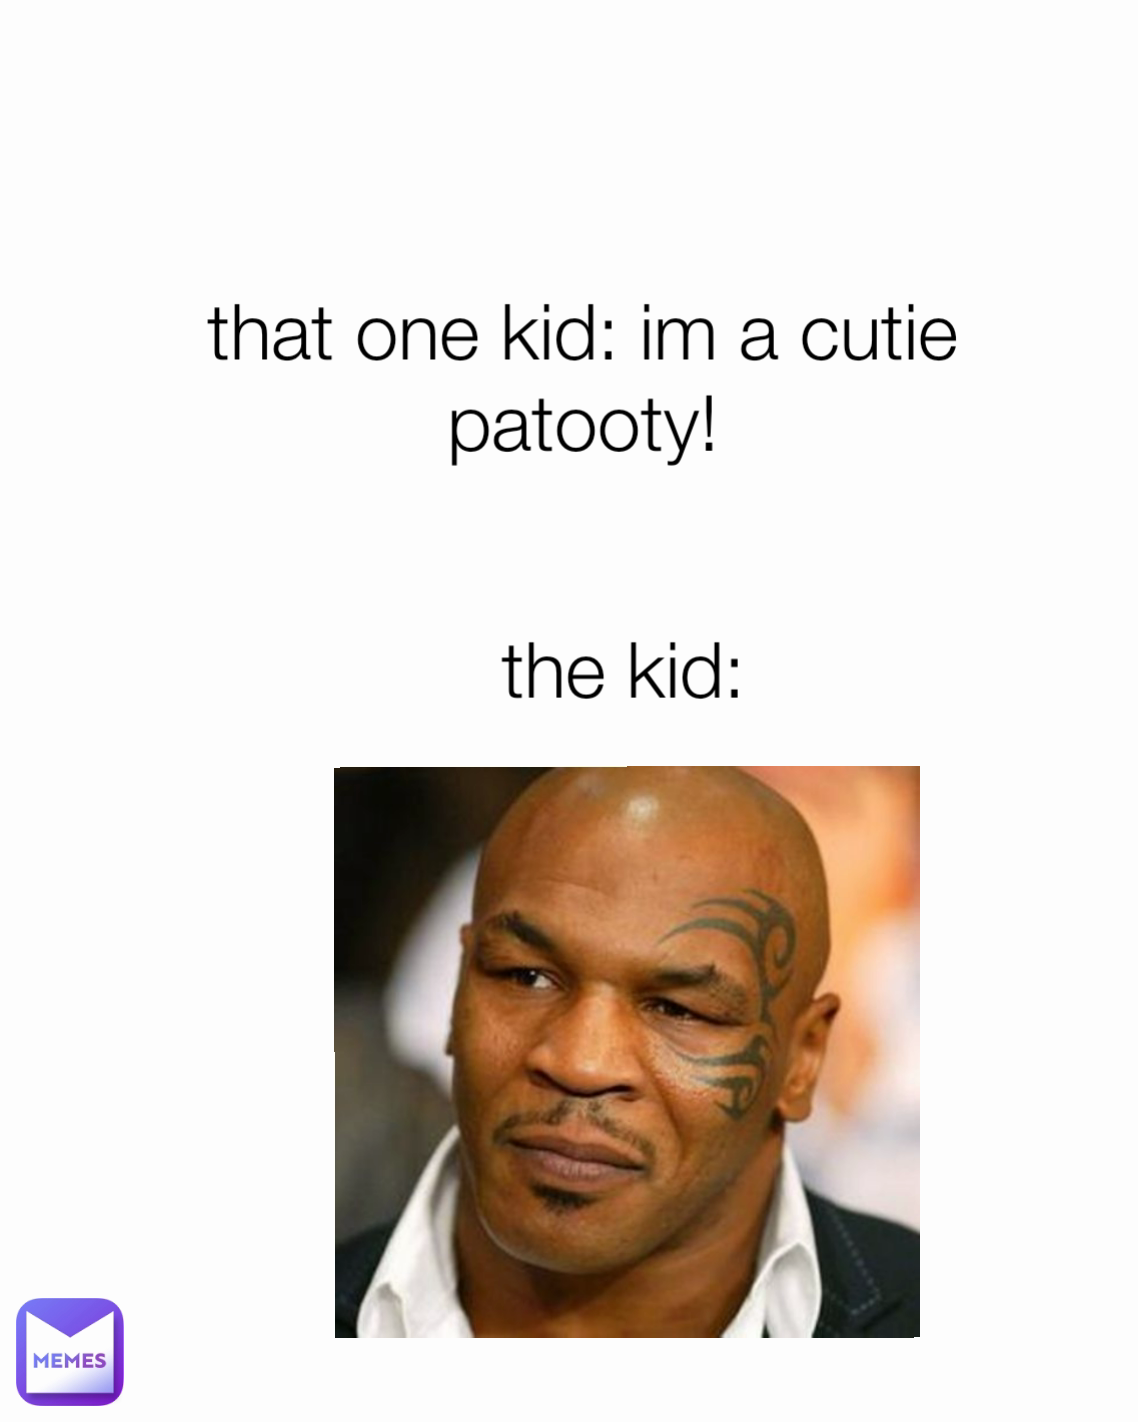 the kid: that one kid: im a cutie patooty!